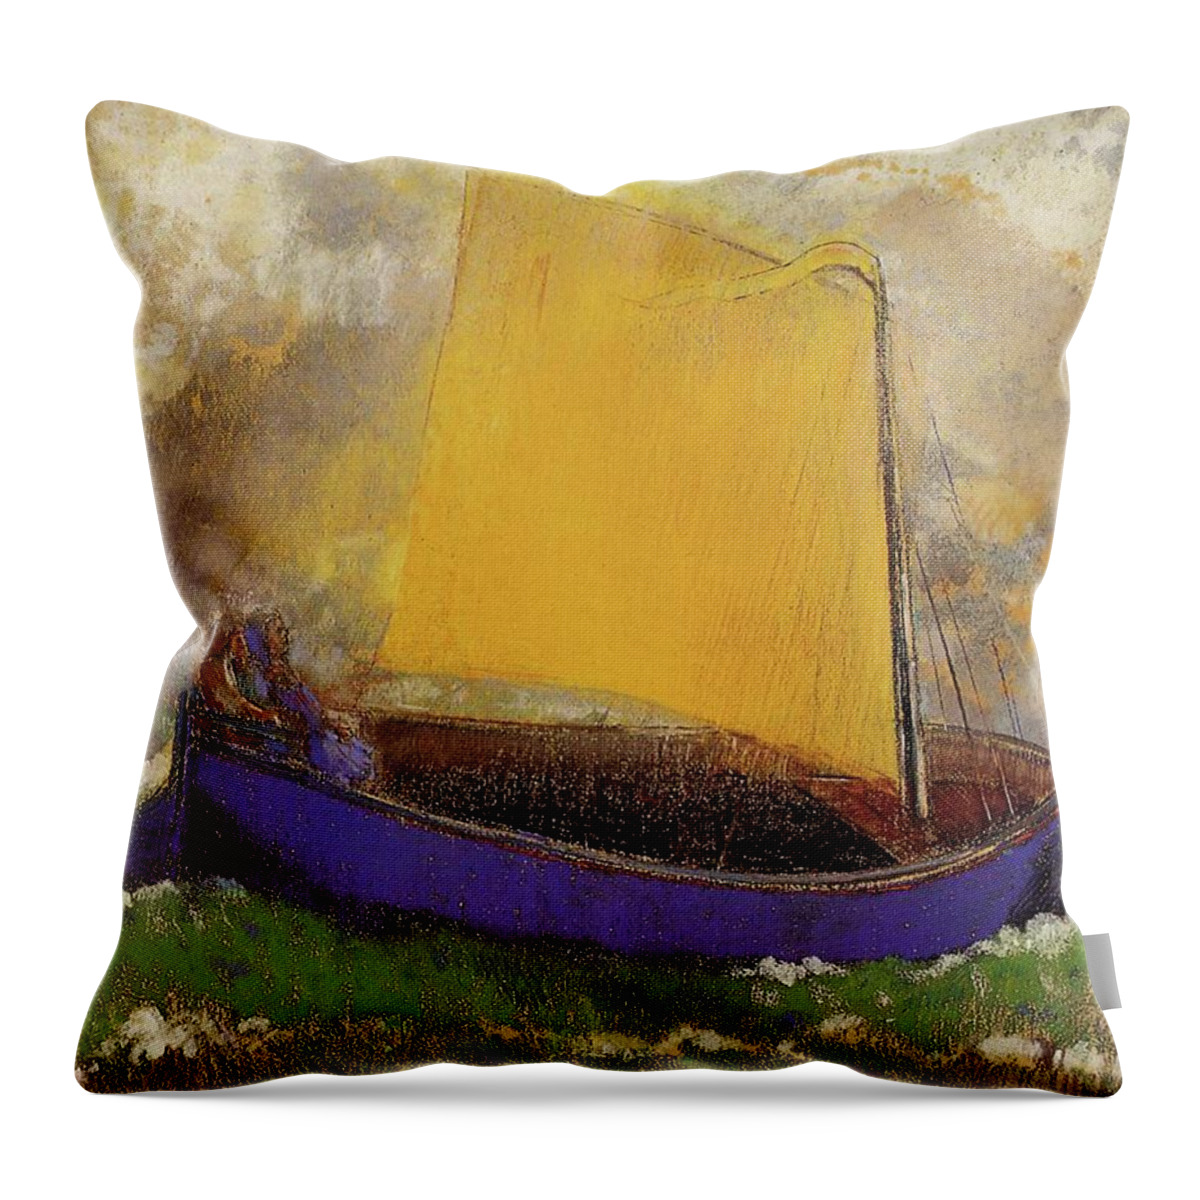 The Mysterious Boat Throw Pillow featuring the painting The Mysterious Boat by Odilon Redon